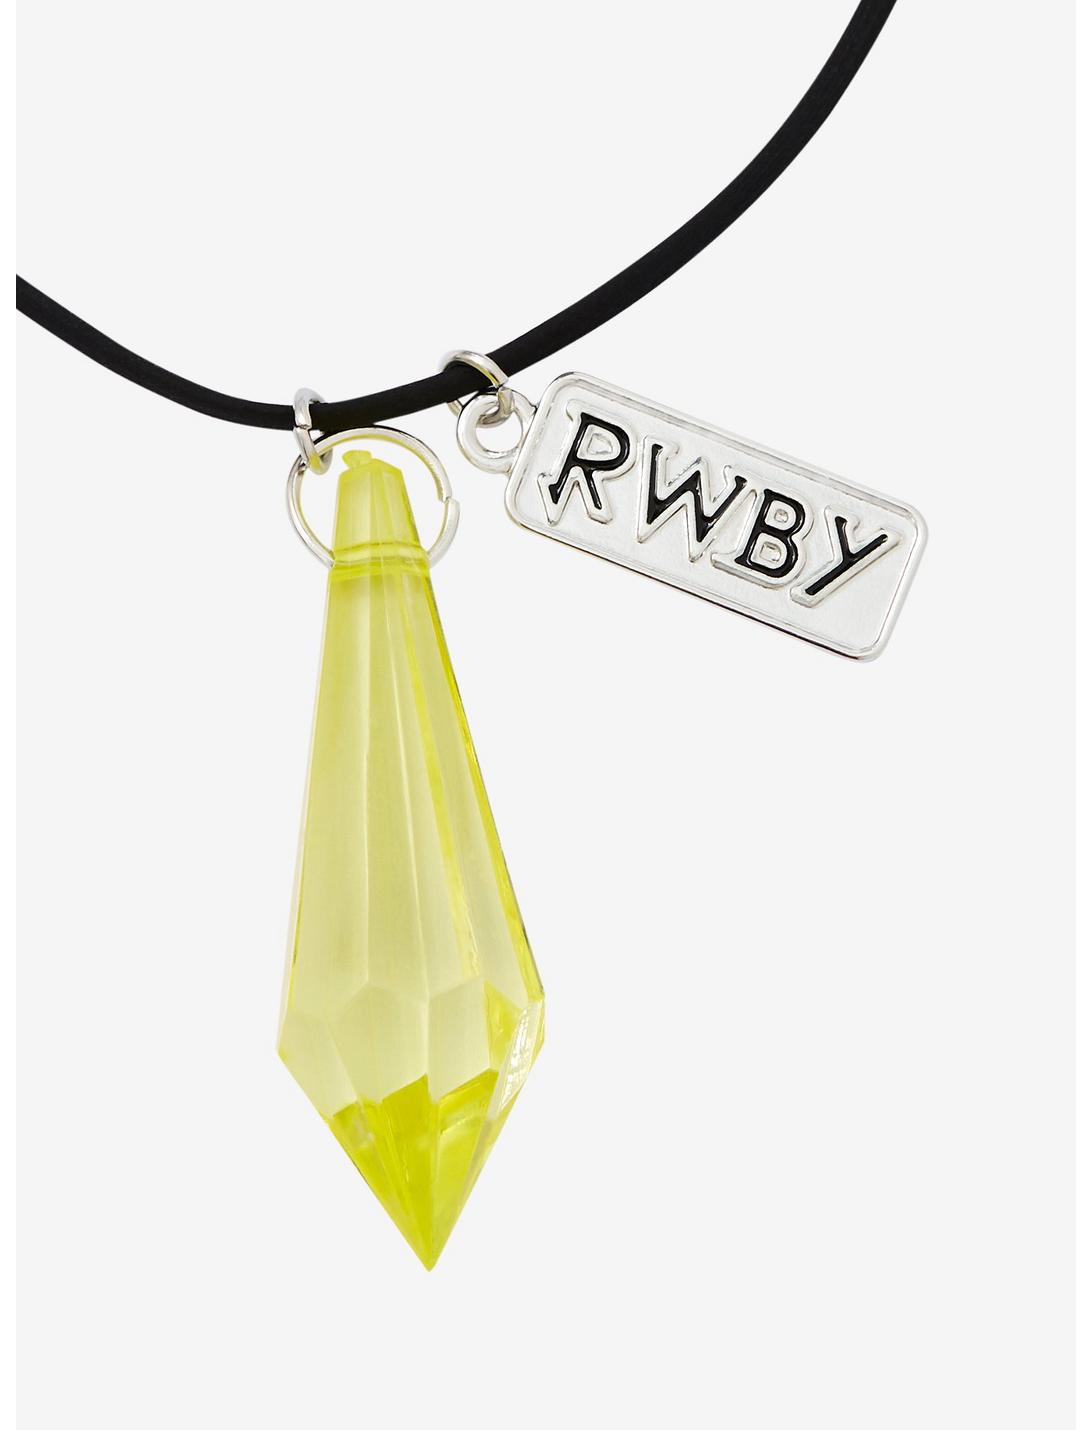 RWBY Yellow Dust Crystal Necklace, , hi-res